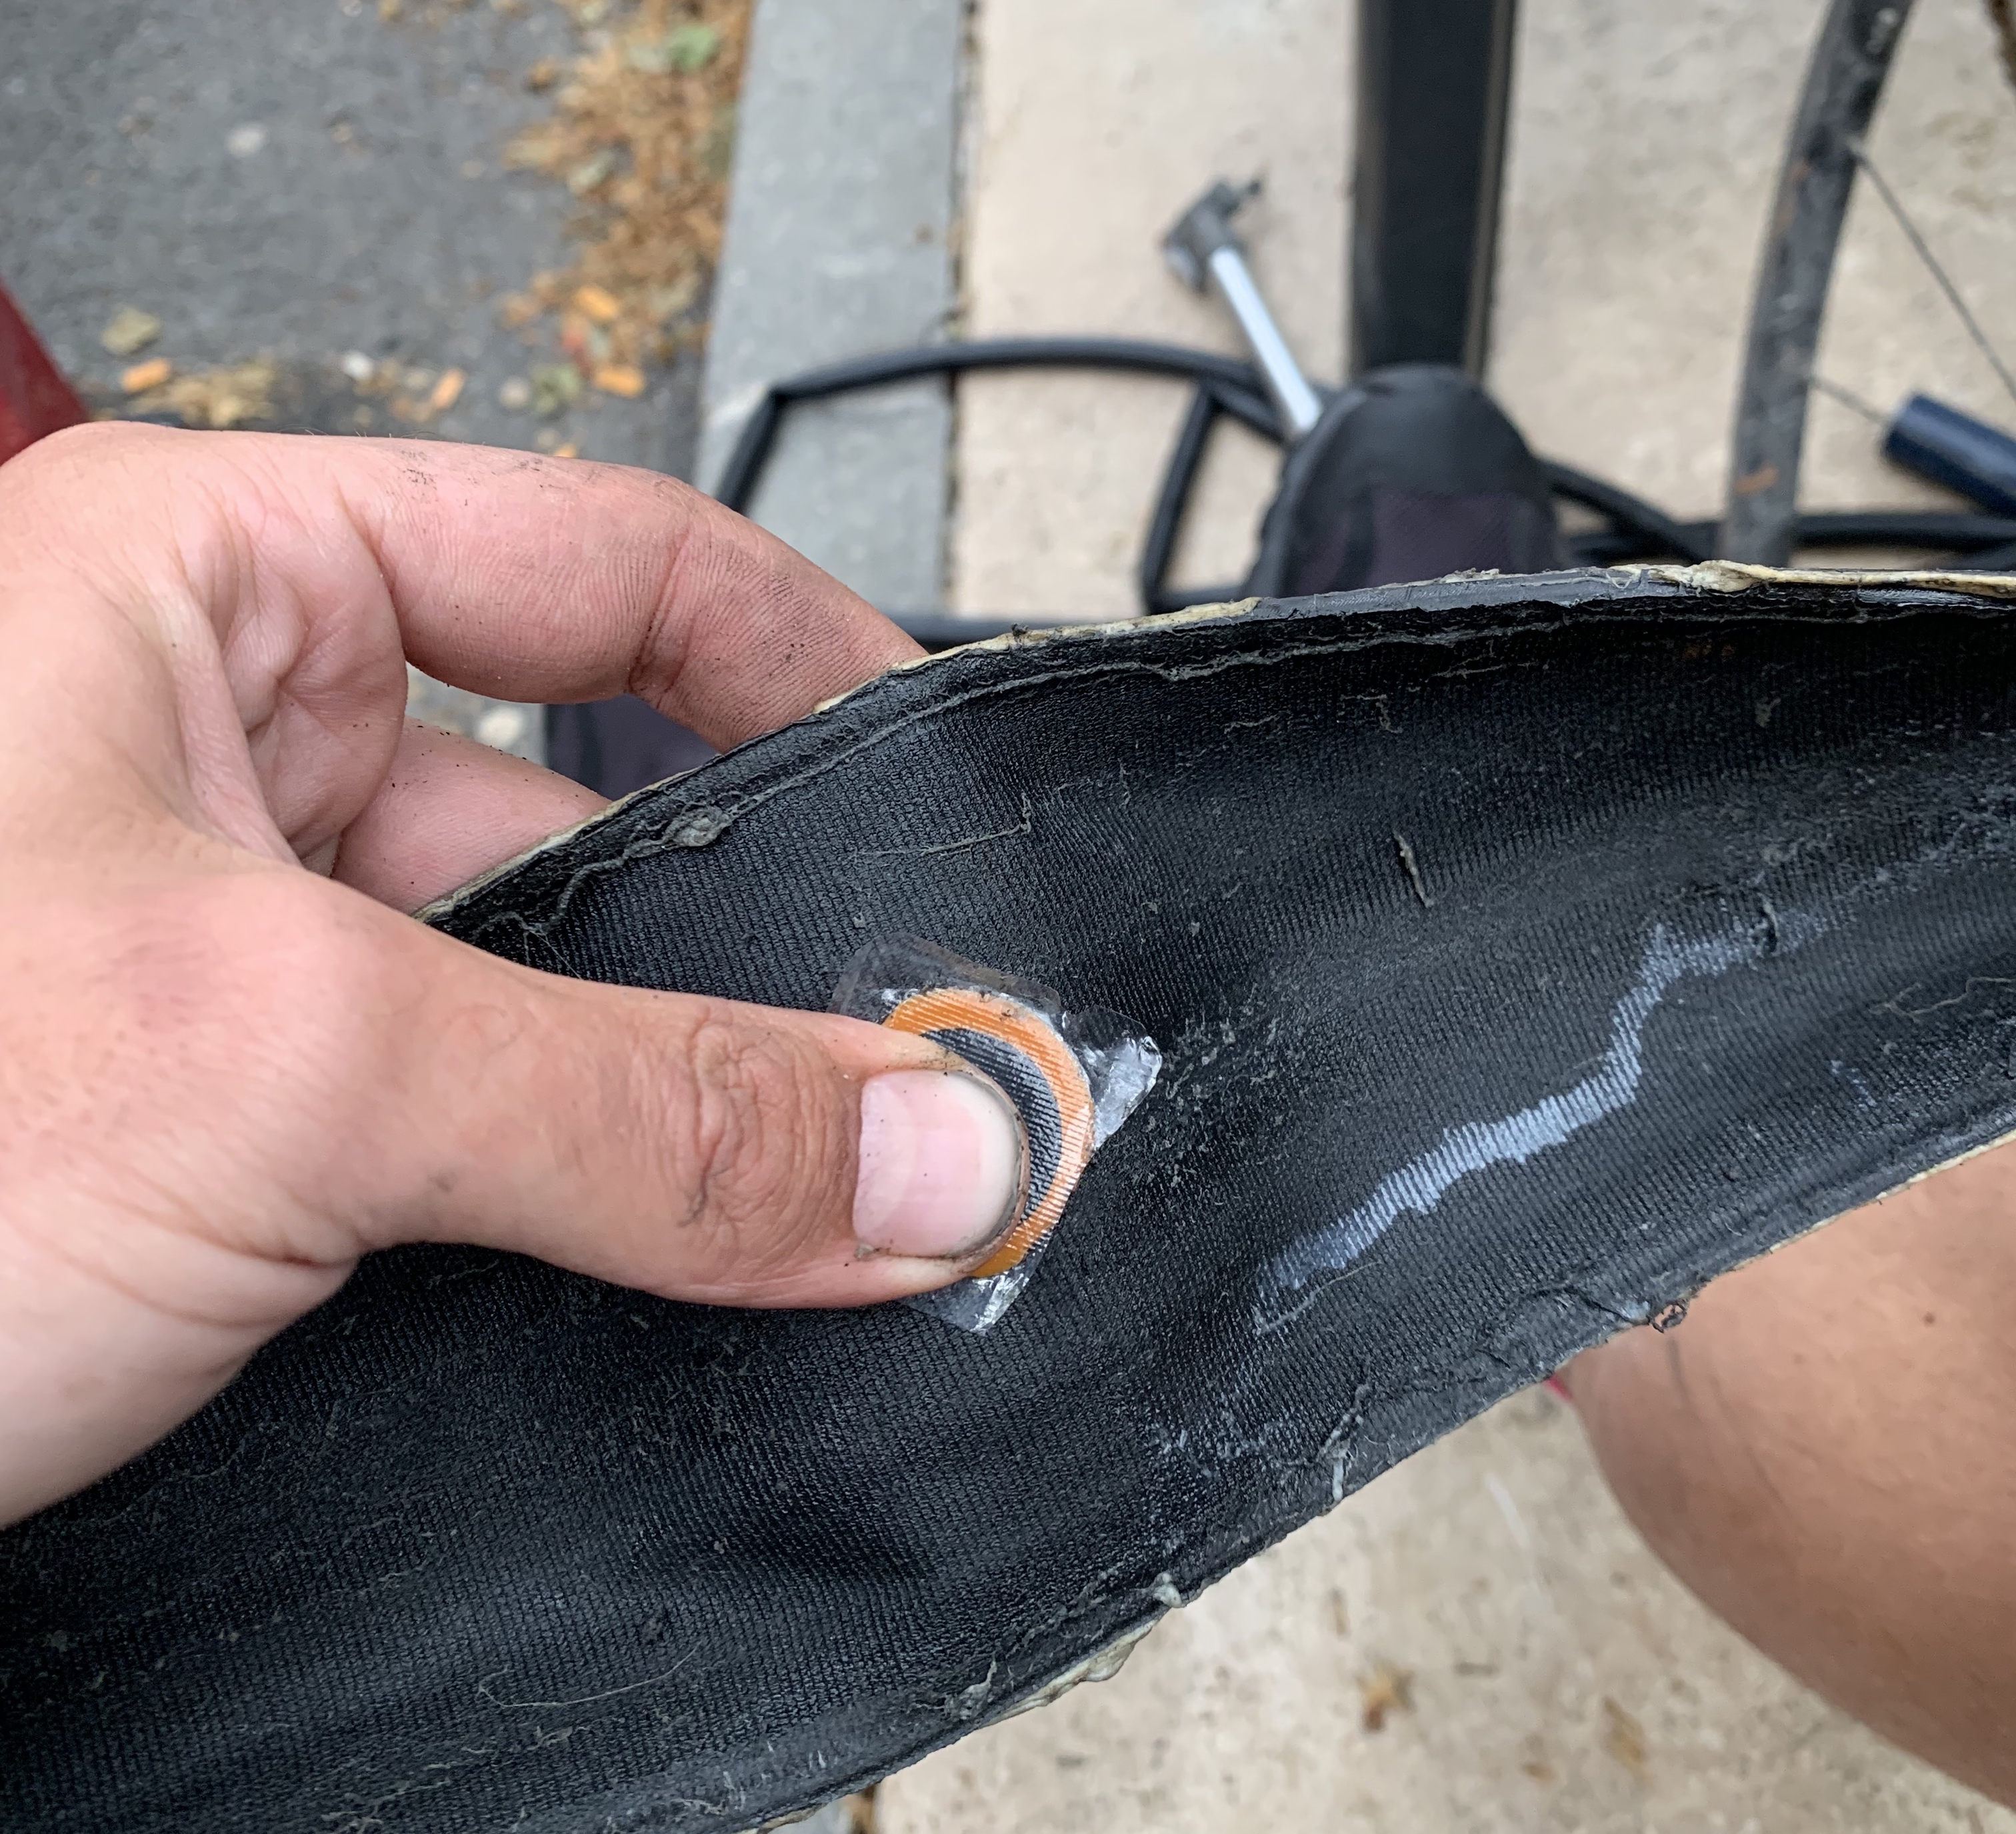 A big enough tyre hole can chew on tubes